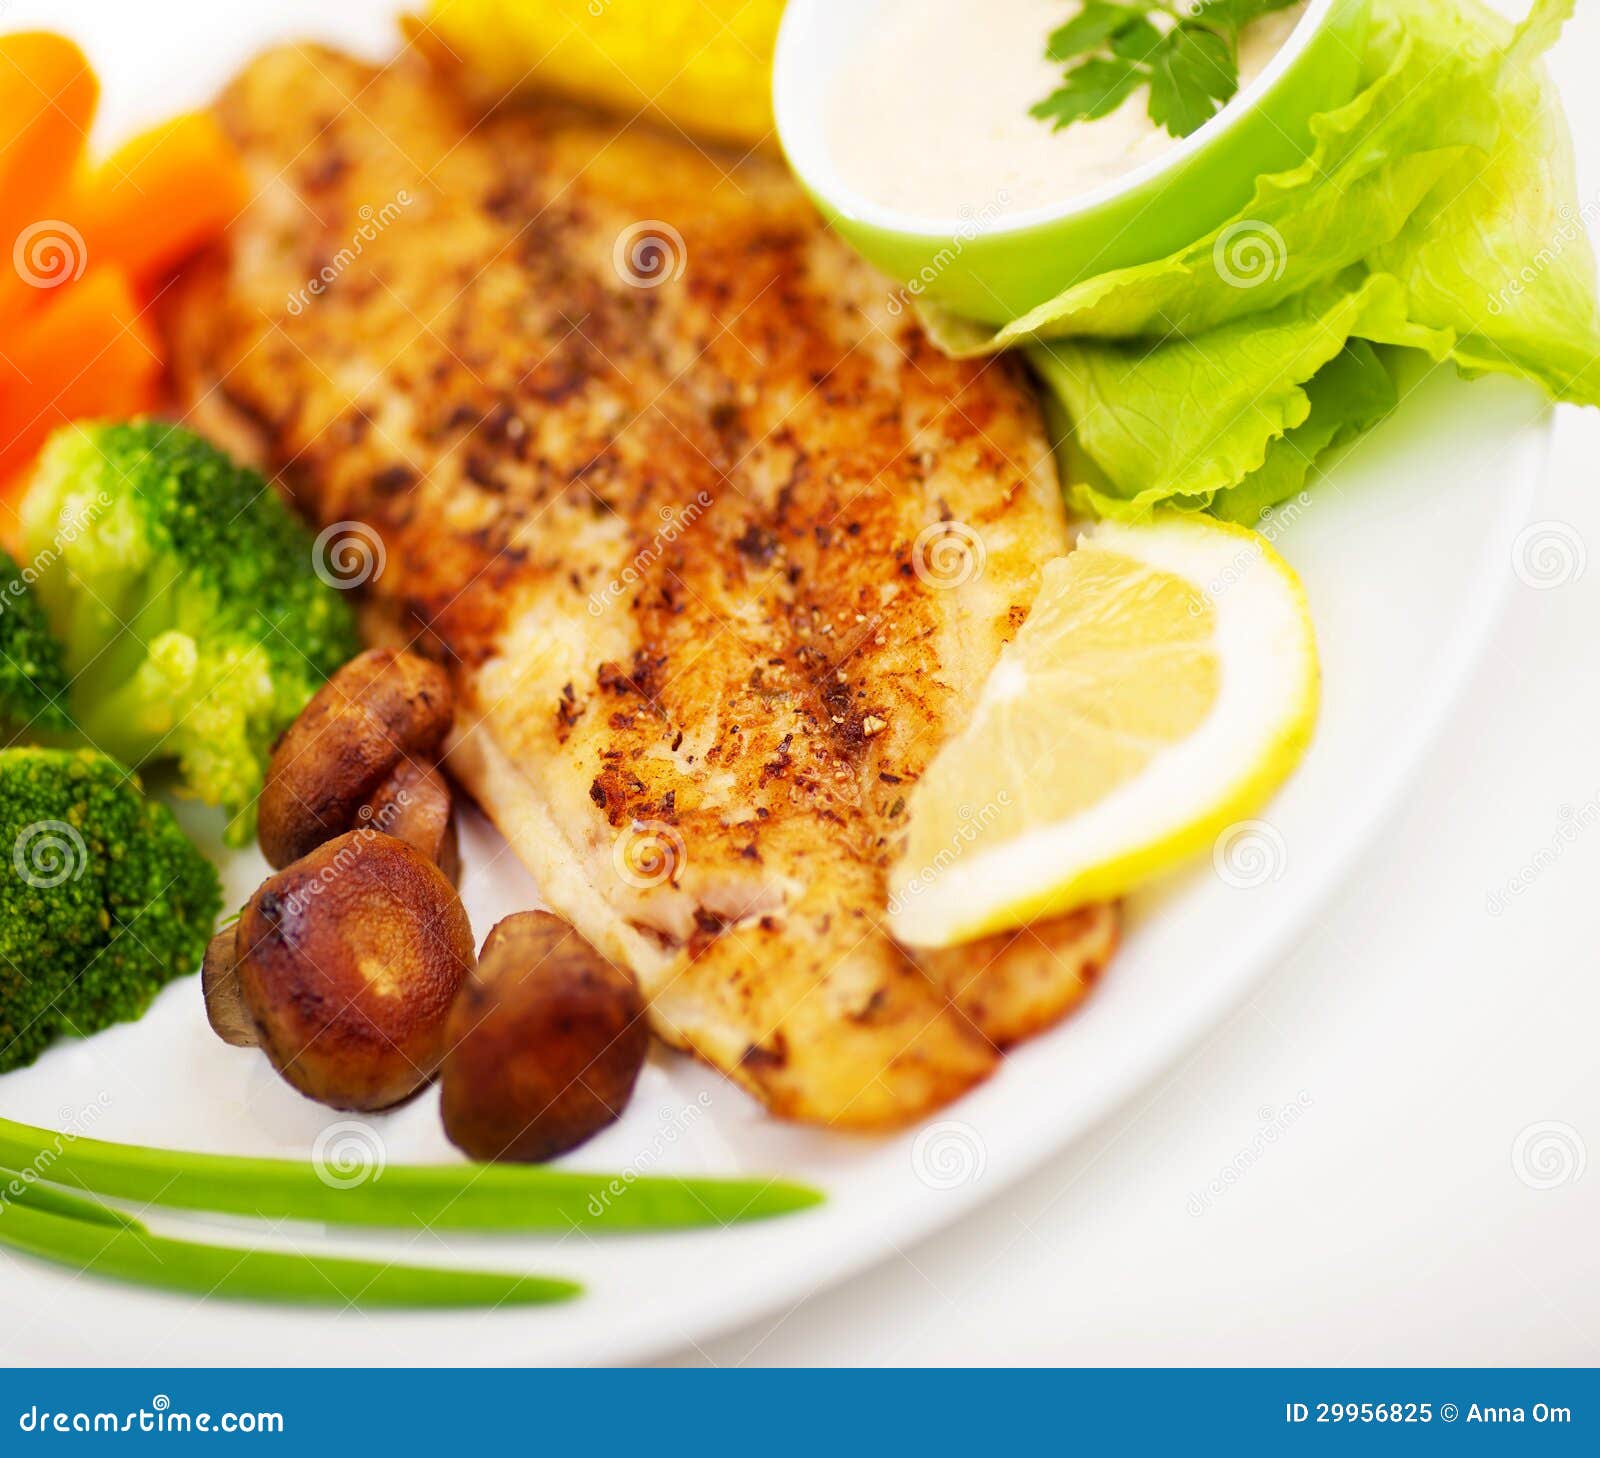 Tasty fish fillet stock image. Image of grilled, fish - 29956825